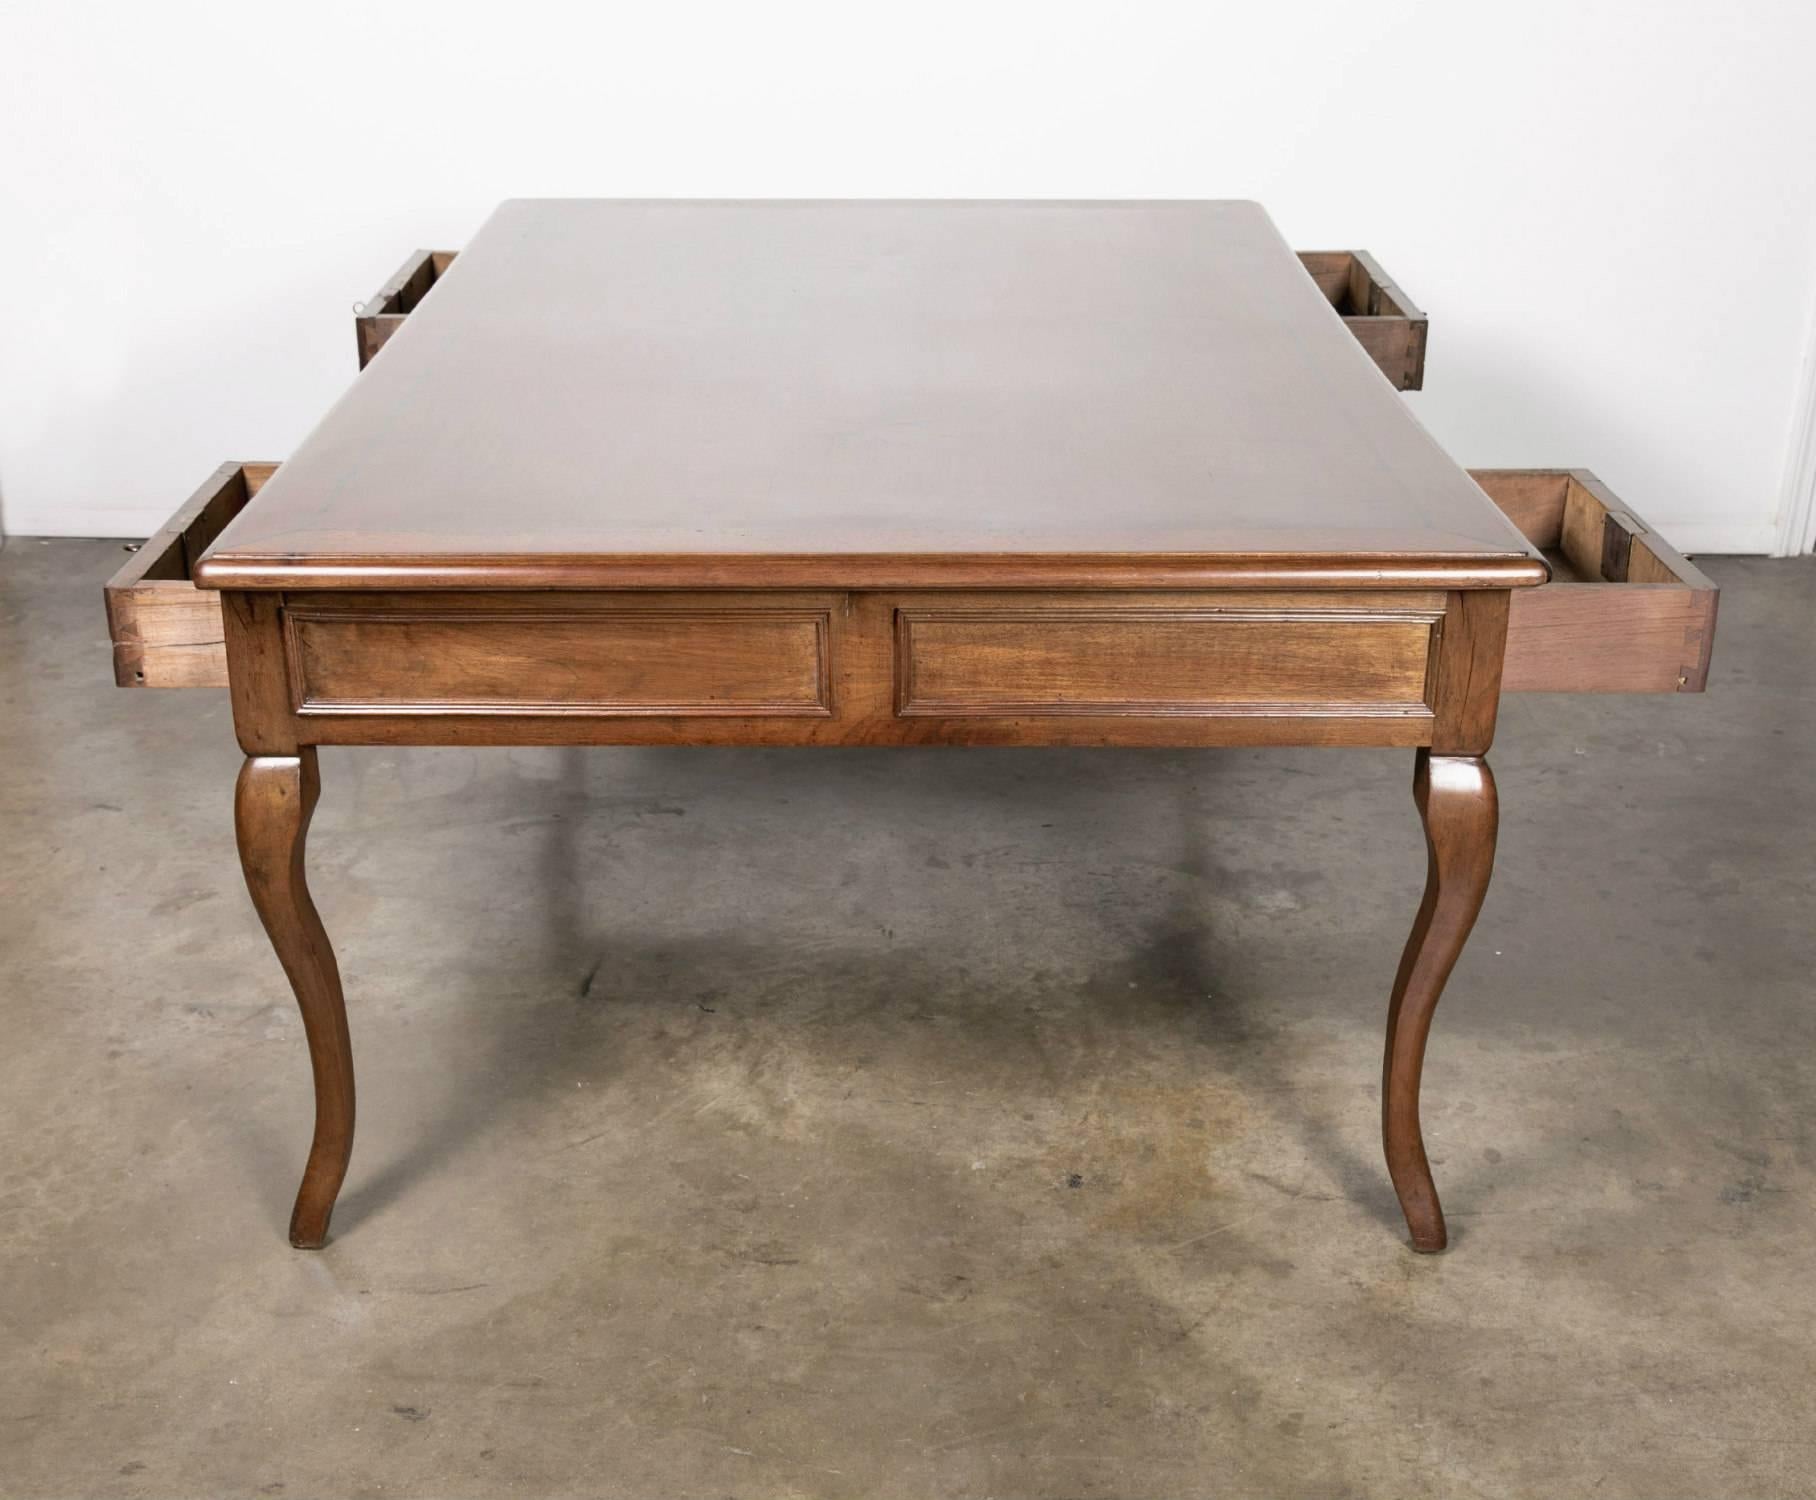 19th Century Grand French Louis XV Style Walnut Partner's Desk with Marquetry Inlay